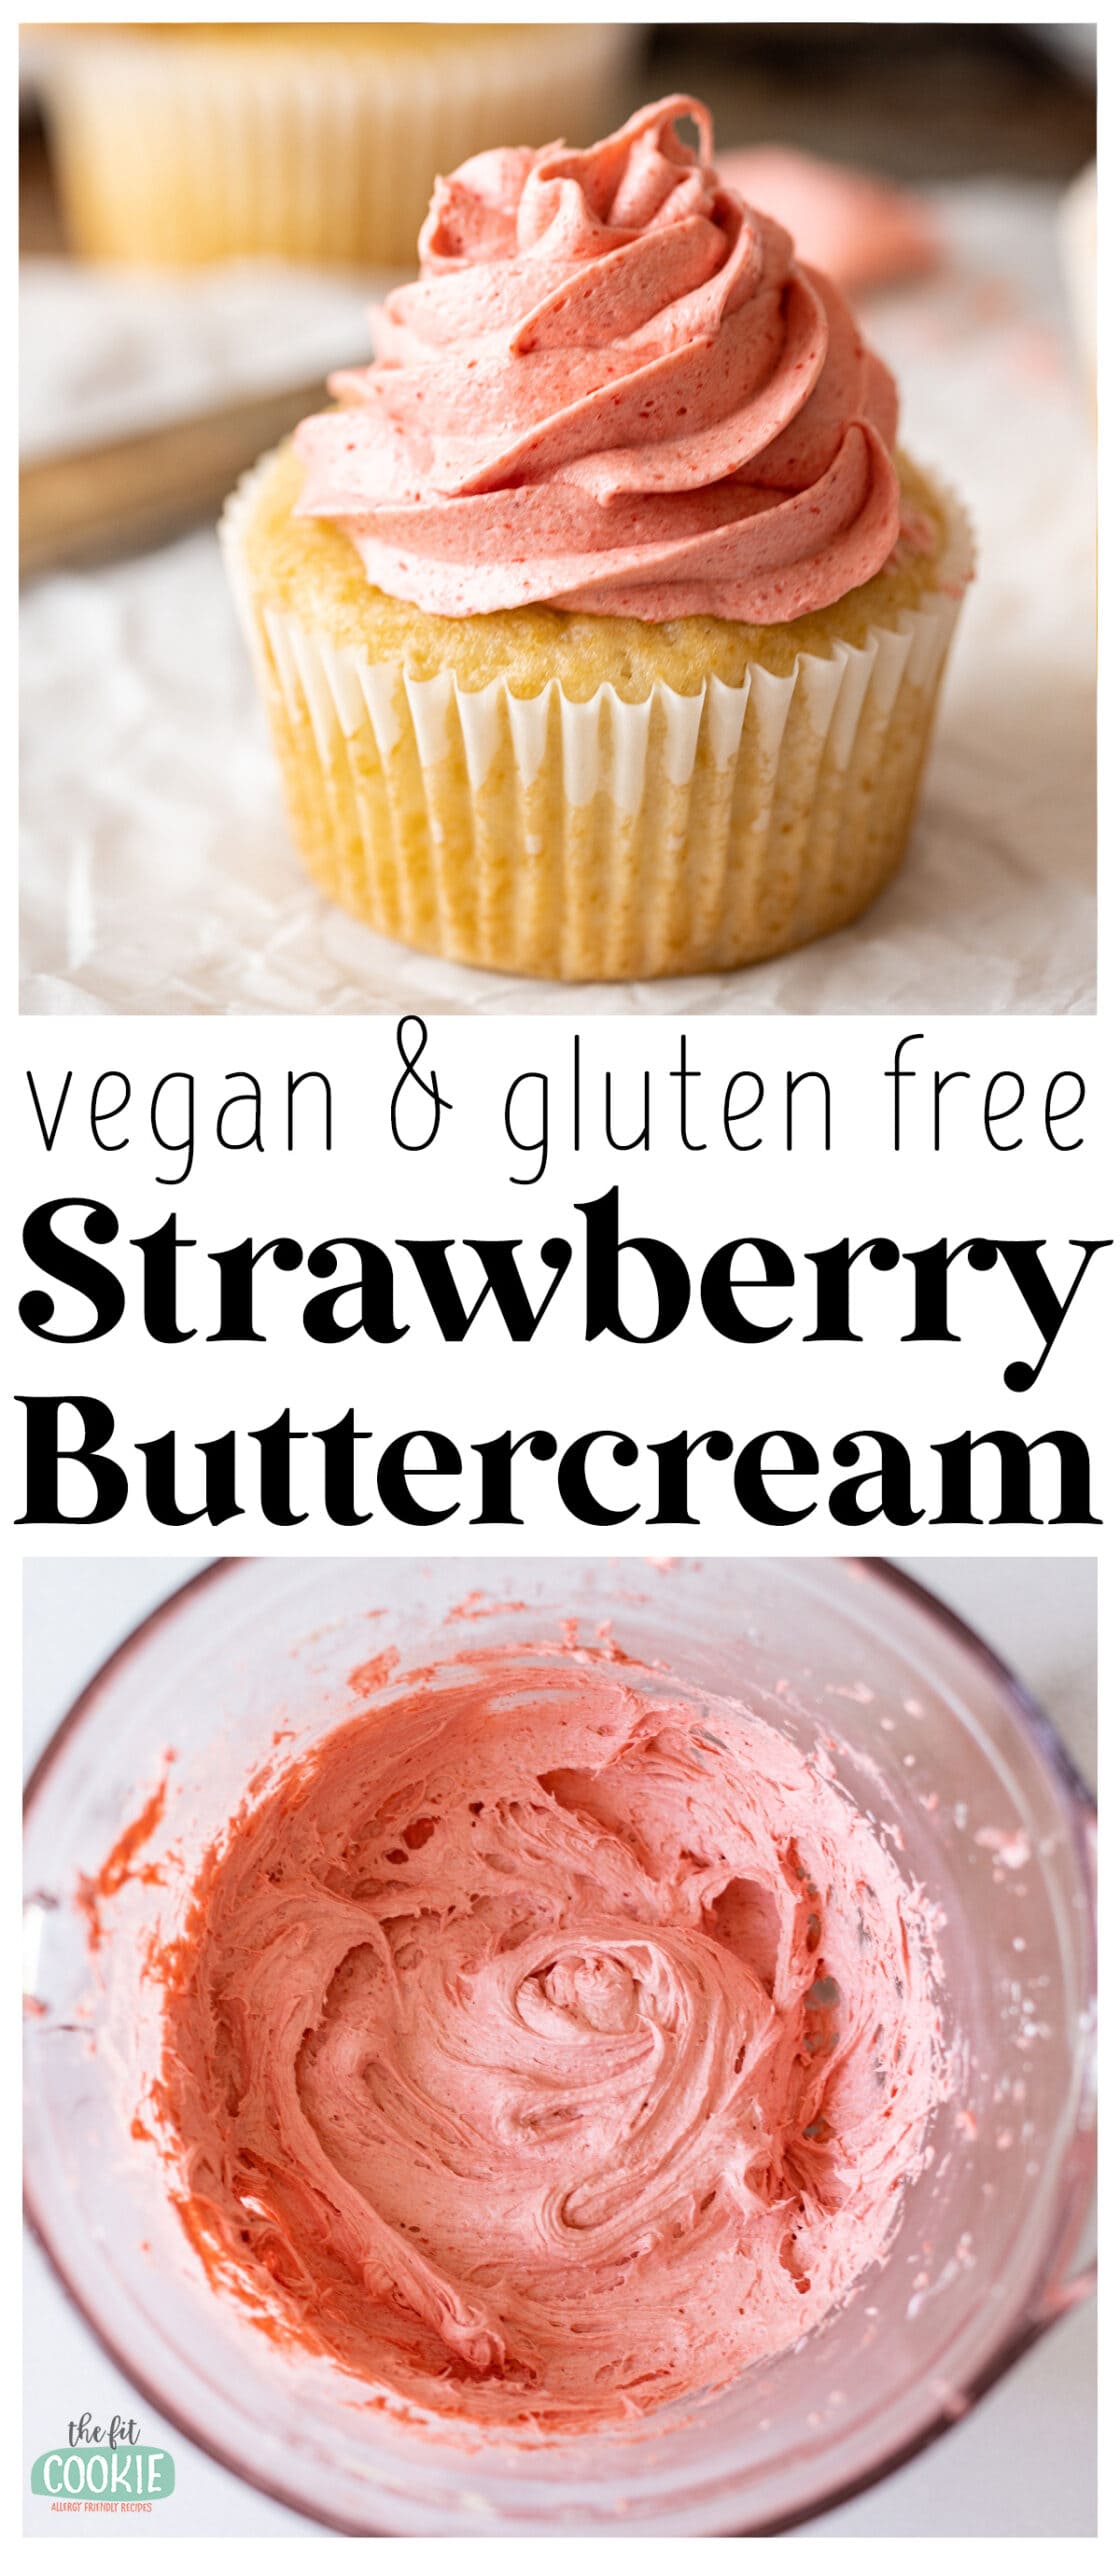 photo collage of 2 views of pink frosting with text overlay that says "vegan and gluten free strawberry buttercream". 